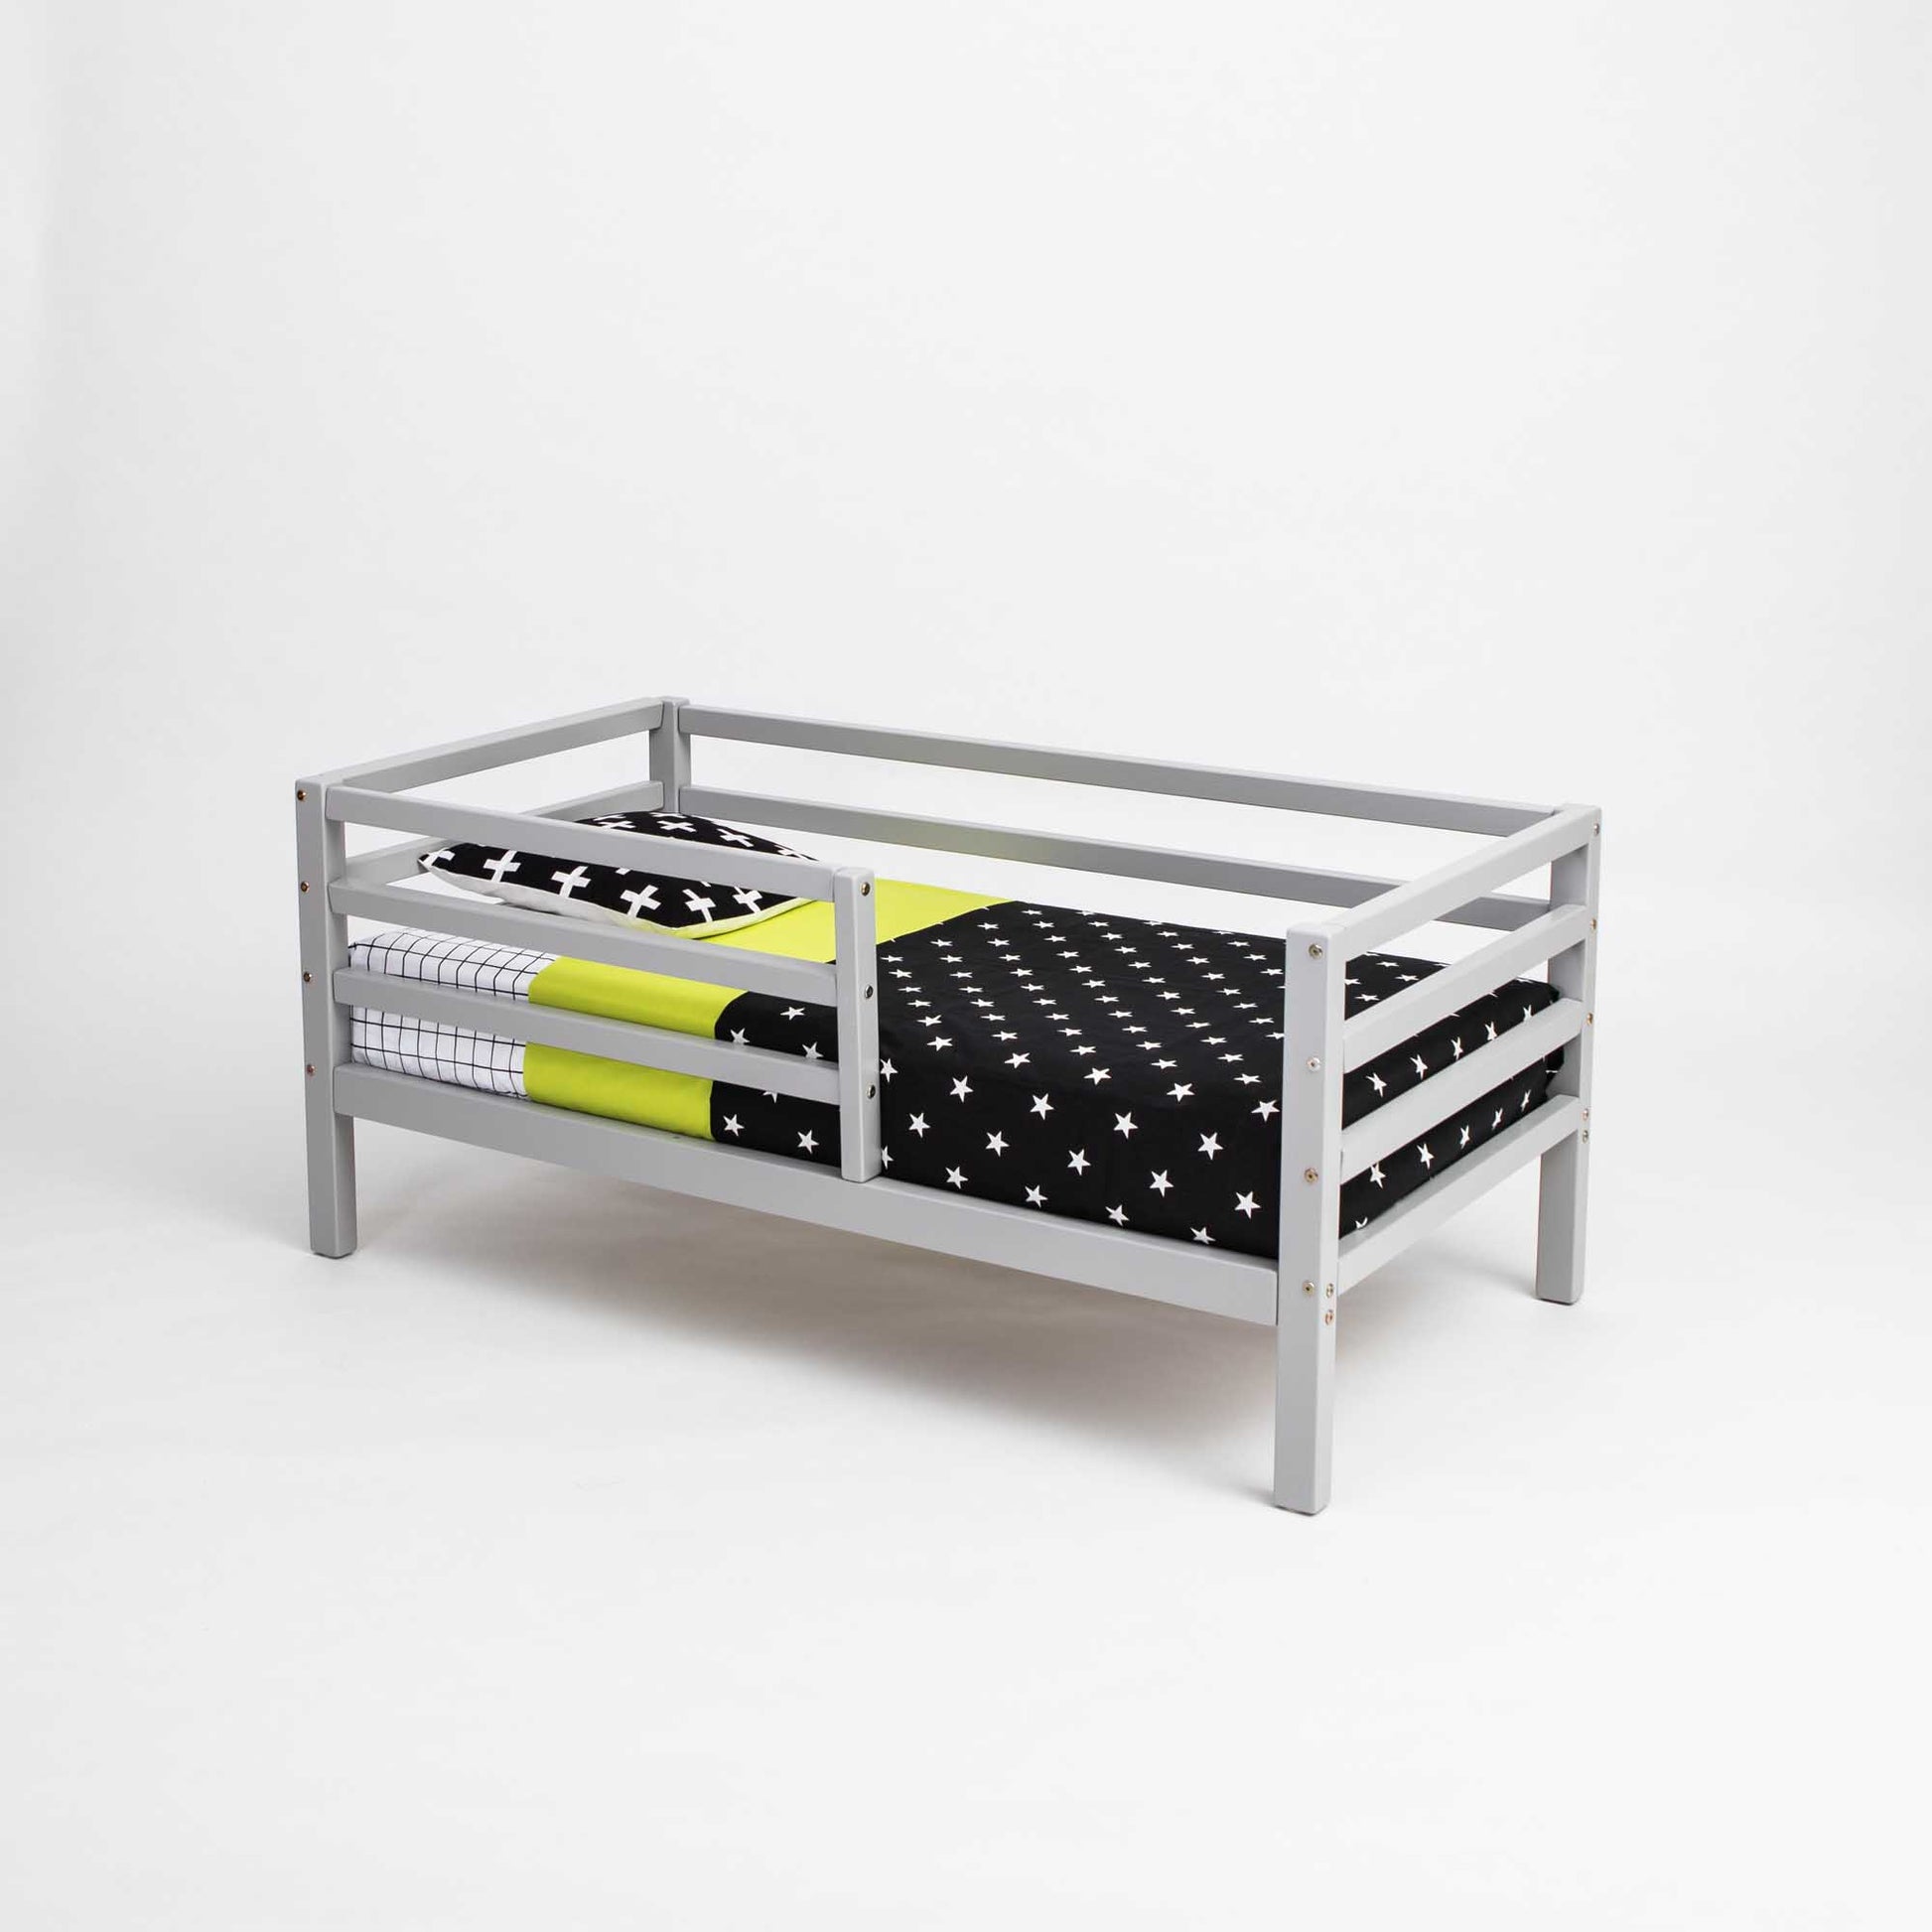 A Sweet Home From Wood Kids' bed on legs with a horizontal rail fence and black and yellow polka dot bedding.